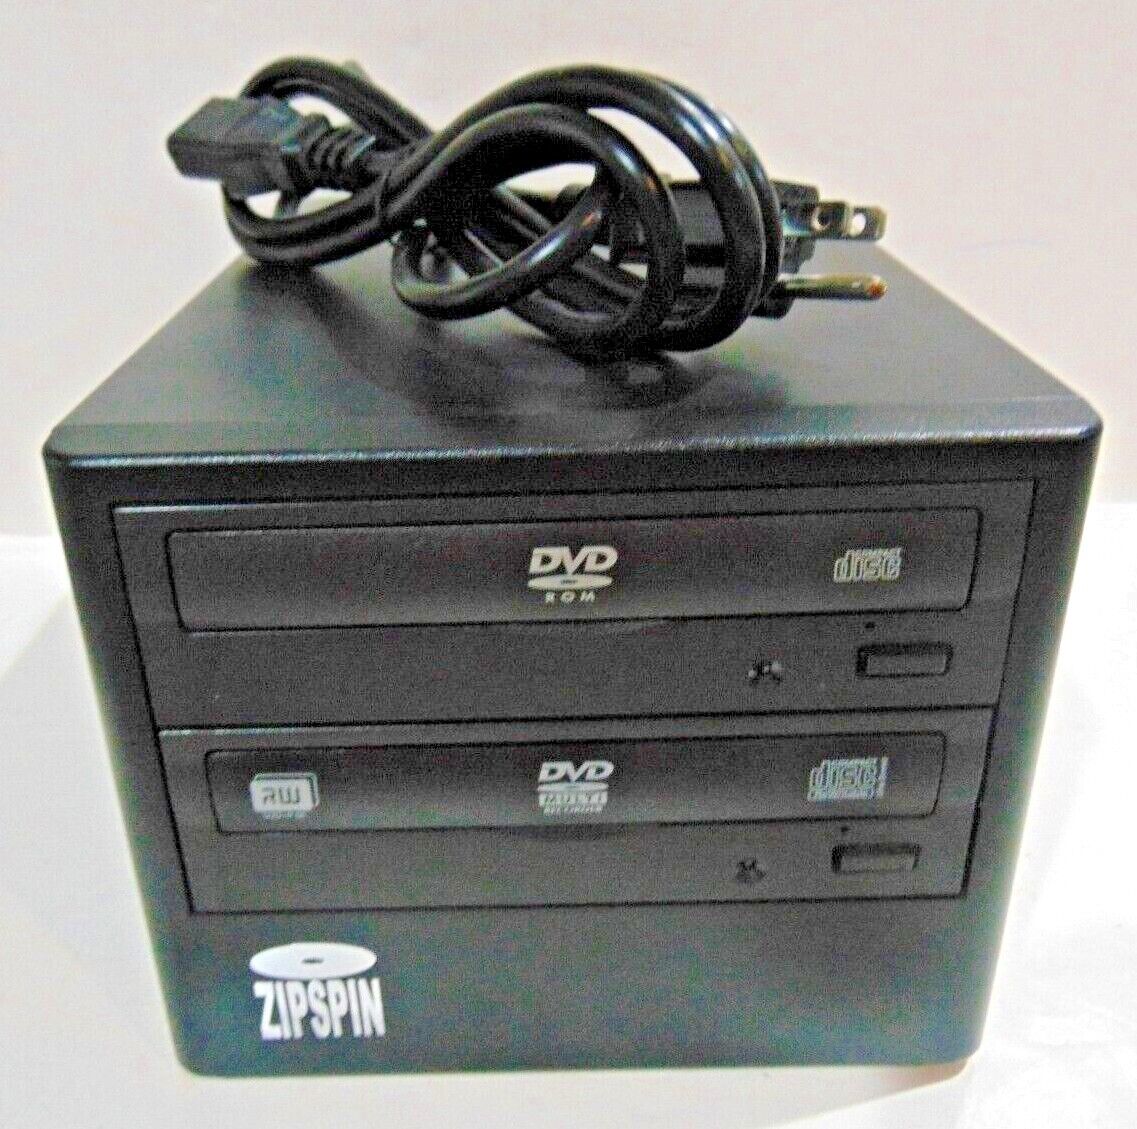 Zipspin CD & DVD Duplicator - DVD Master-WM P/N 22213 Tested Working Condition